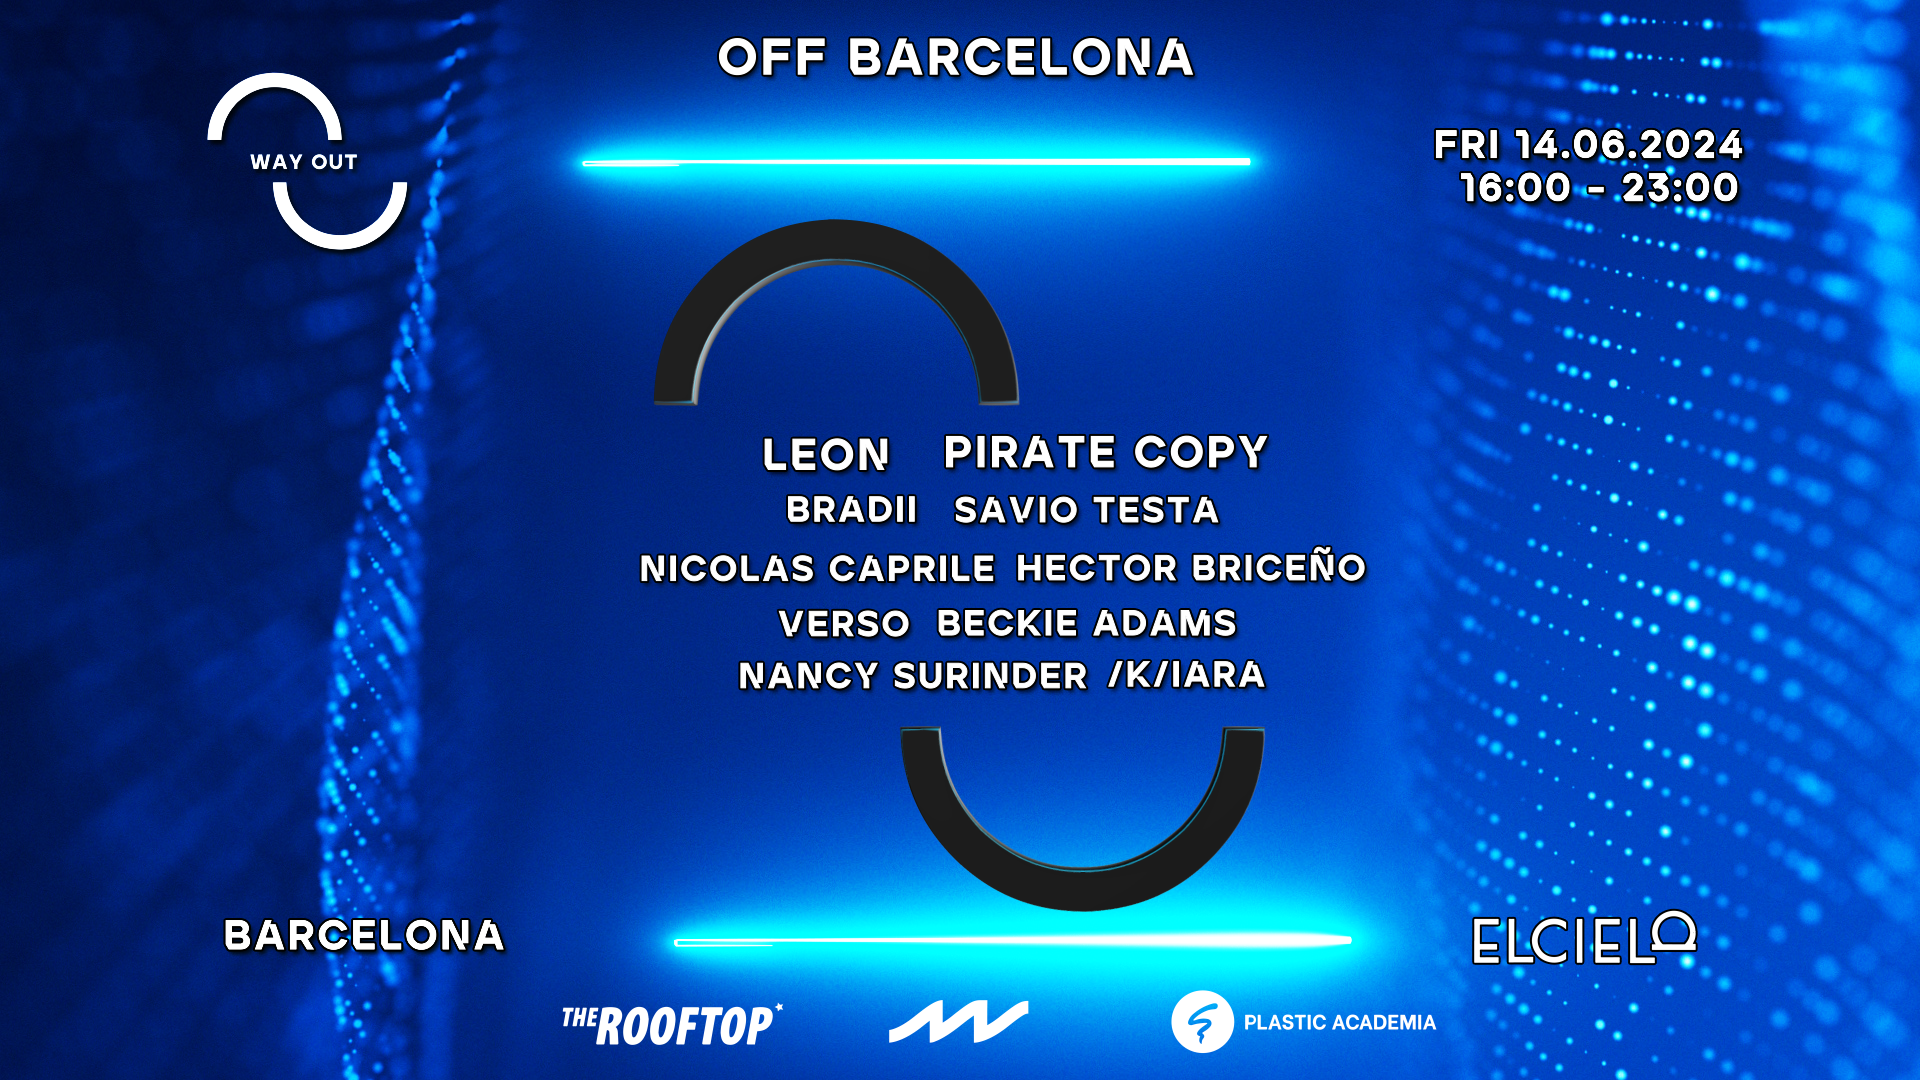 Way Out Makes Its Debut In Barcelona During Off Sonar Weekend At El Cielo Sofitel